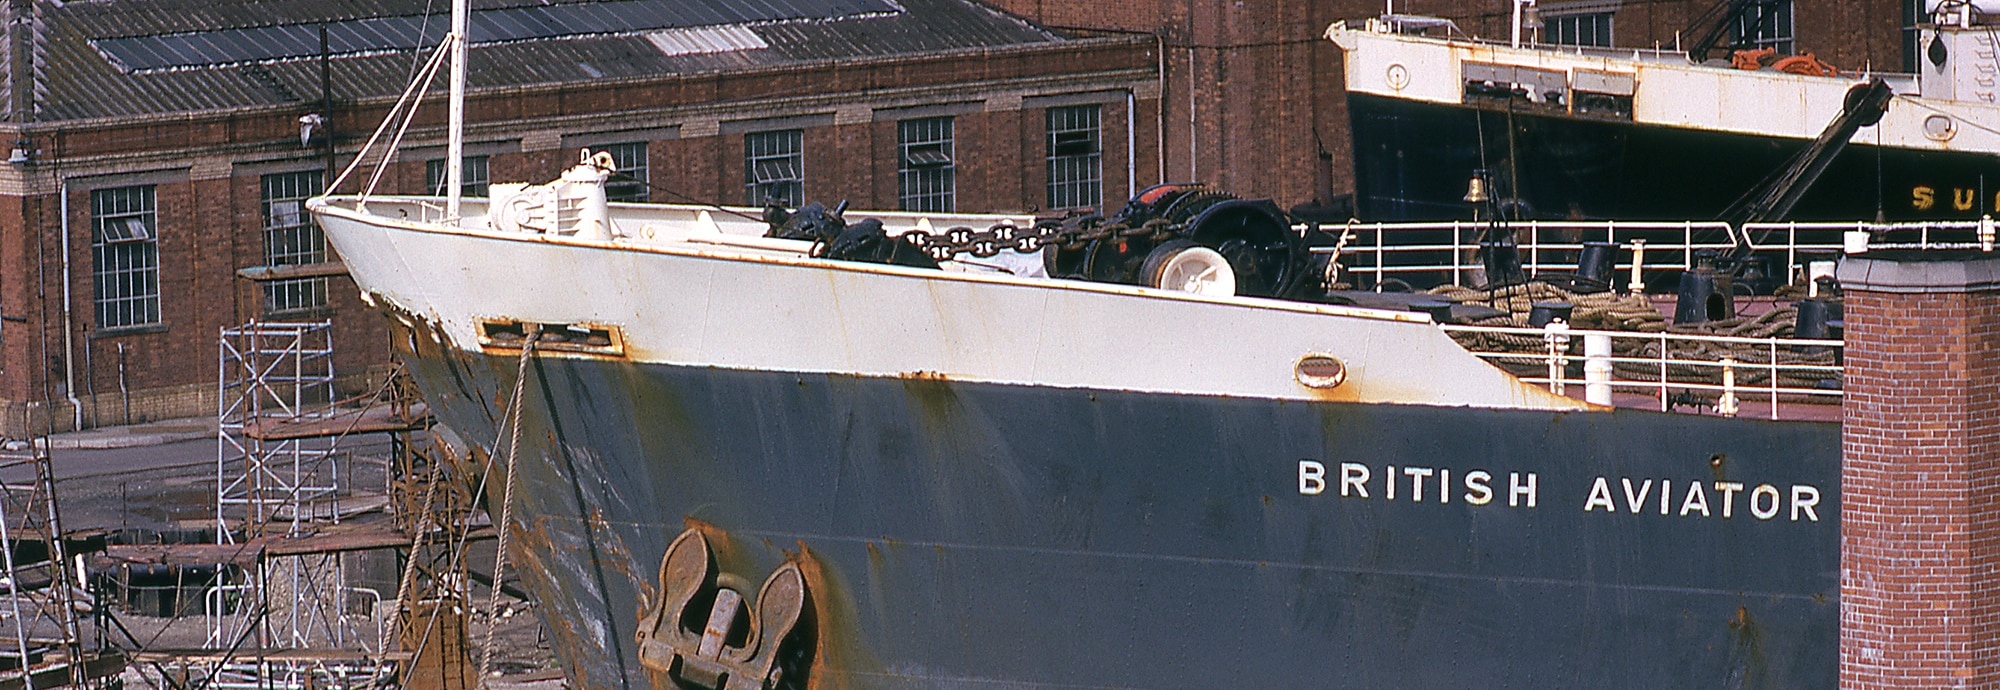 Bow of the ship 'British Aviator' as it sits in Falmouth Docks awaiting repairs.